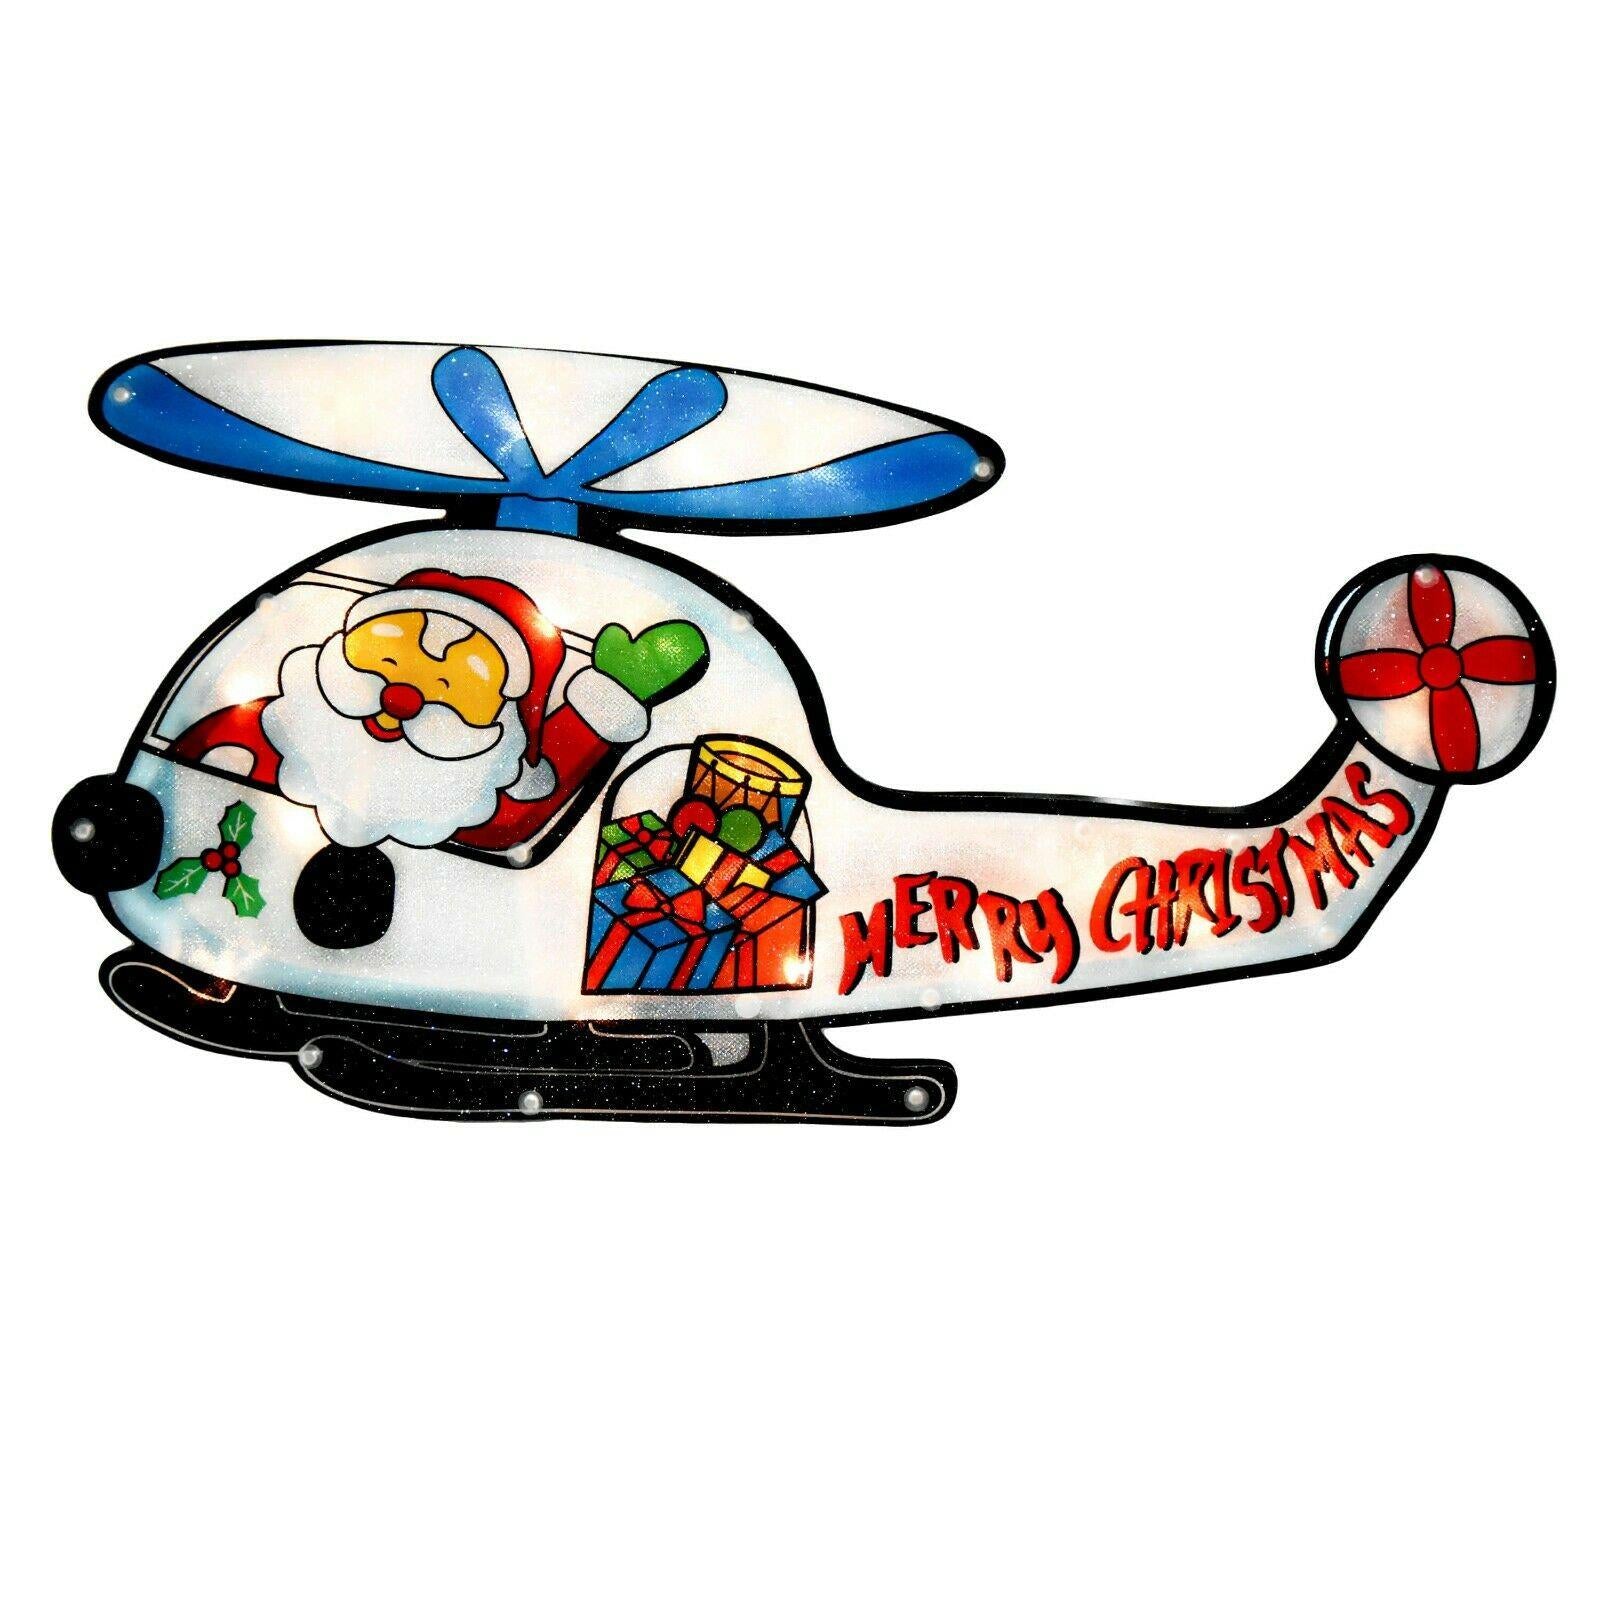 Helicopter Sign Christmas LED Light Silhouette by The Magic Toy Shop - The Magic Toy Shop